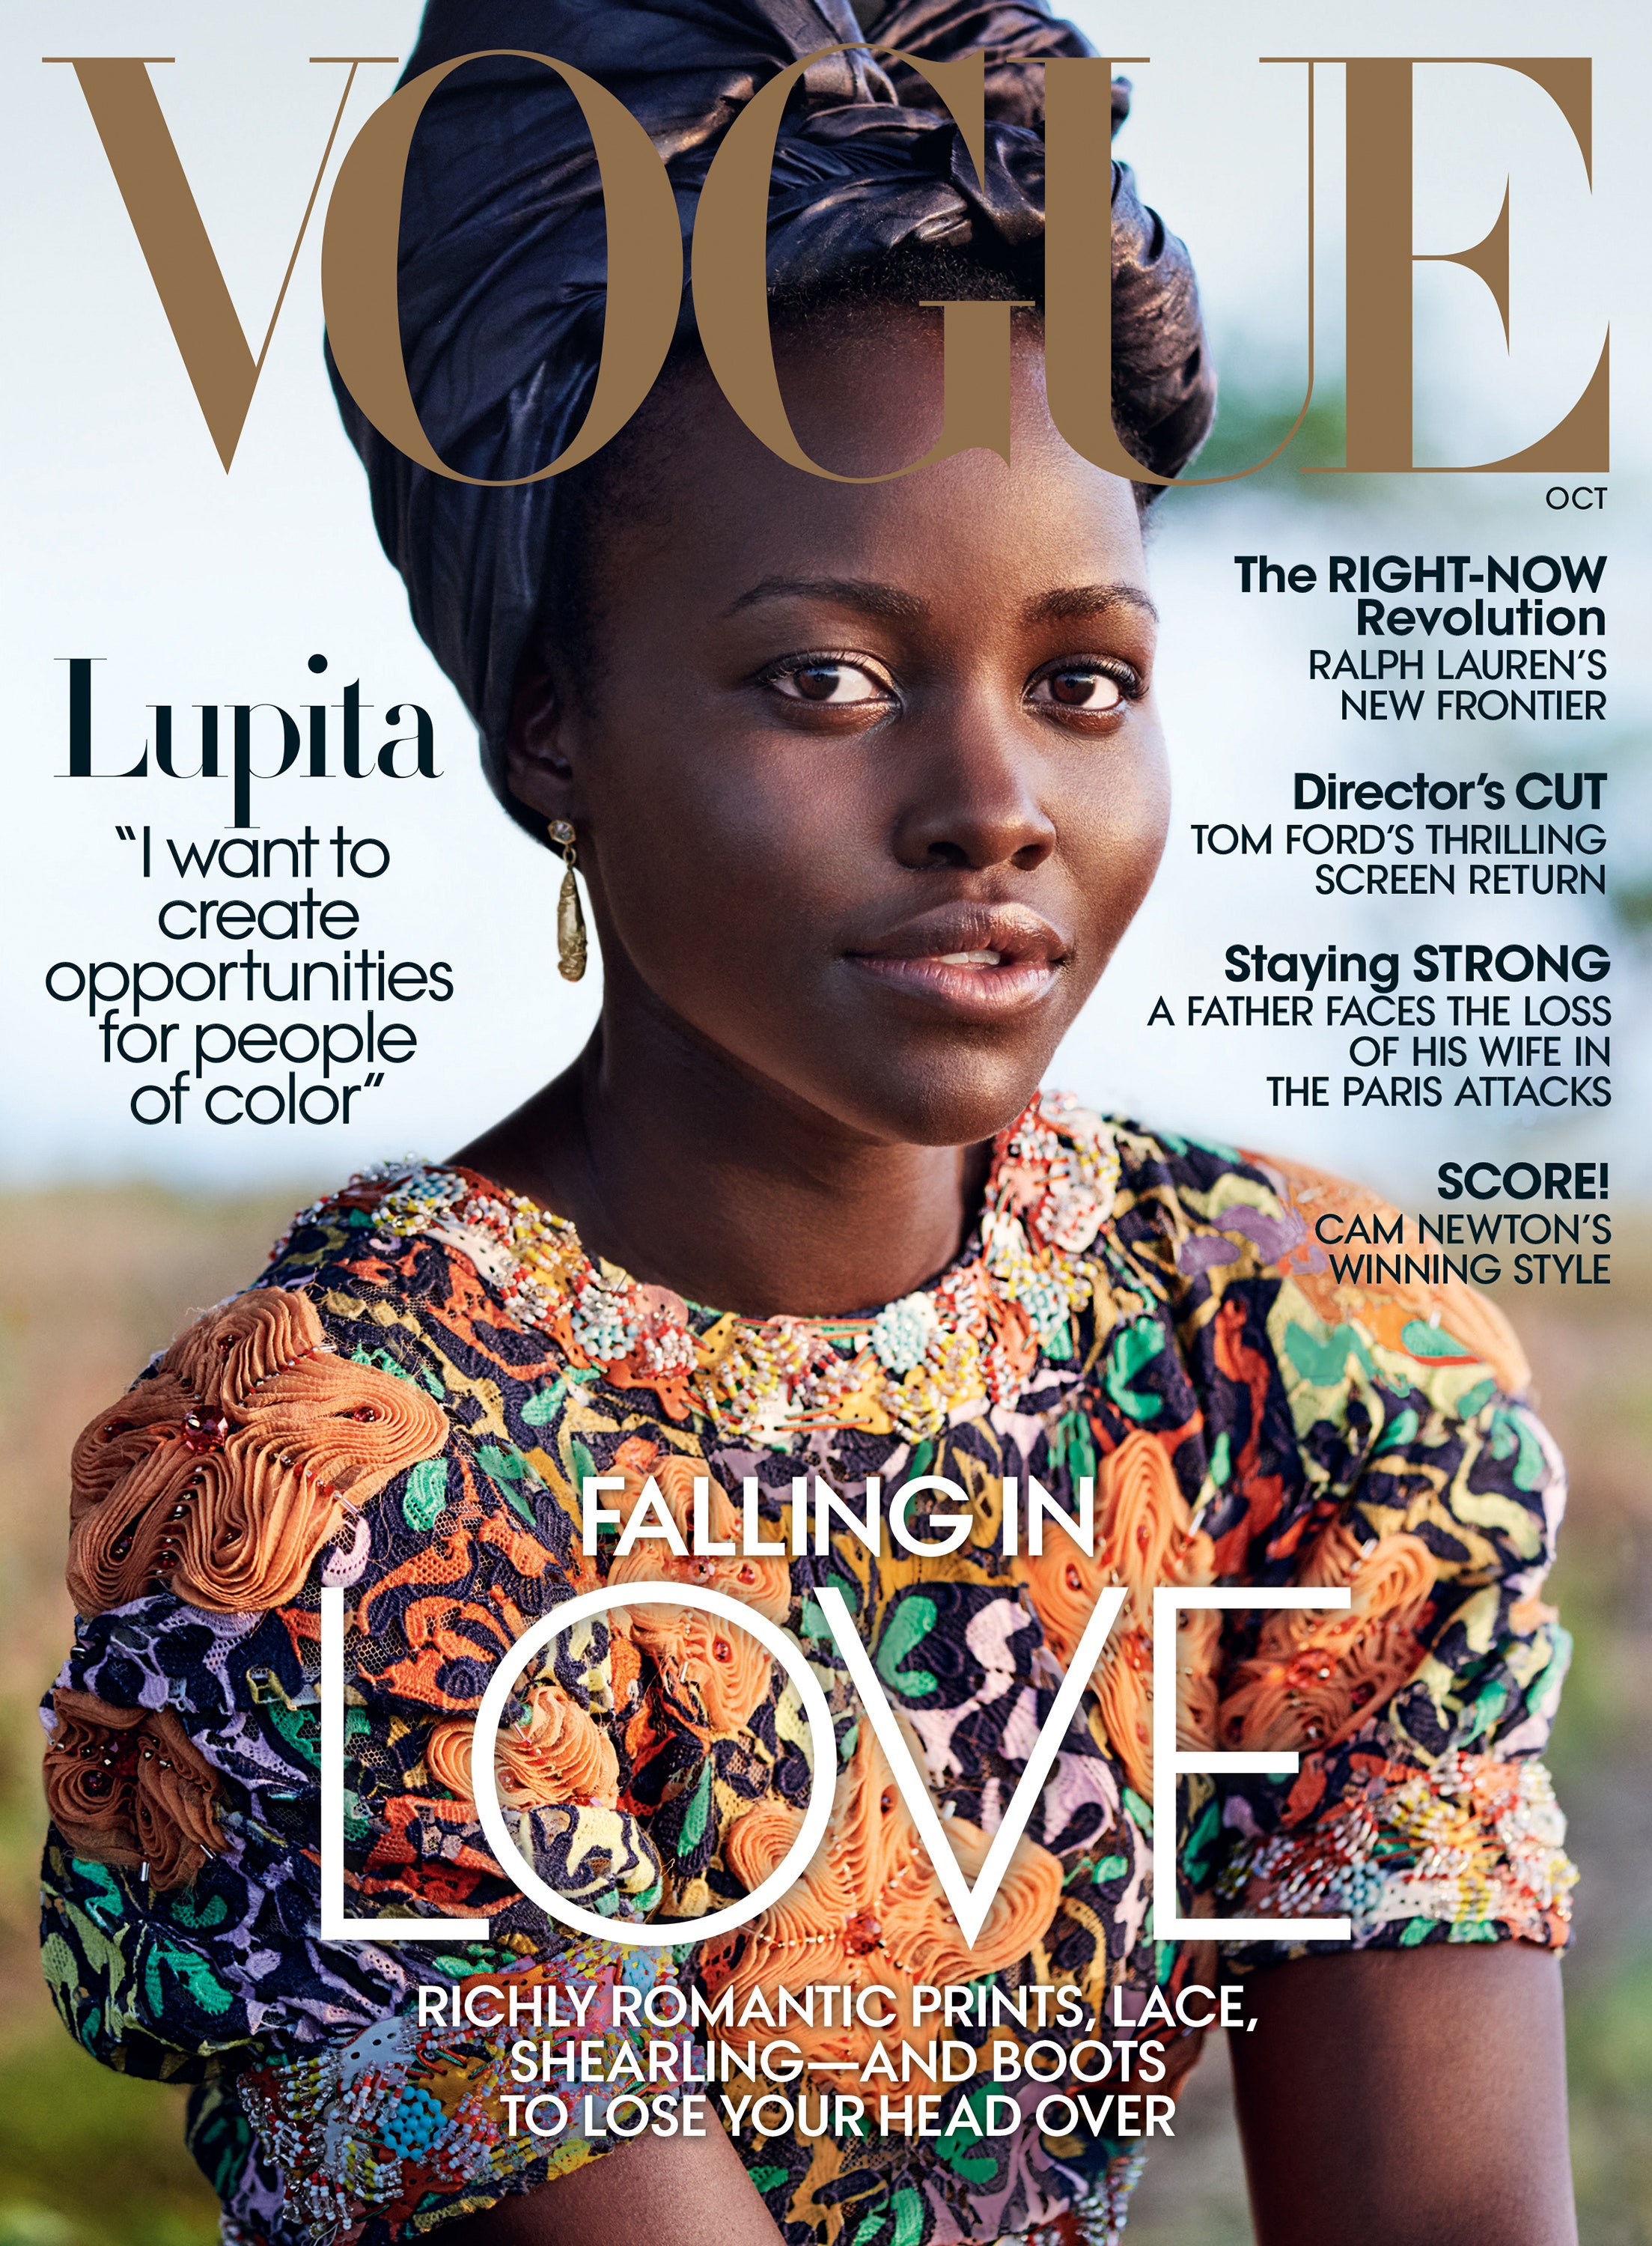 Lupita Nyong'o on the cover of October 2016 Vogue magazine